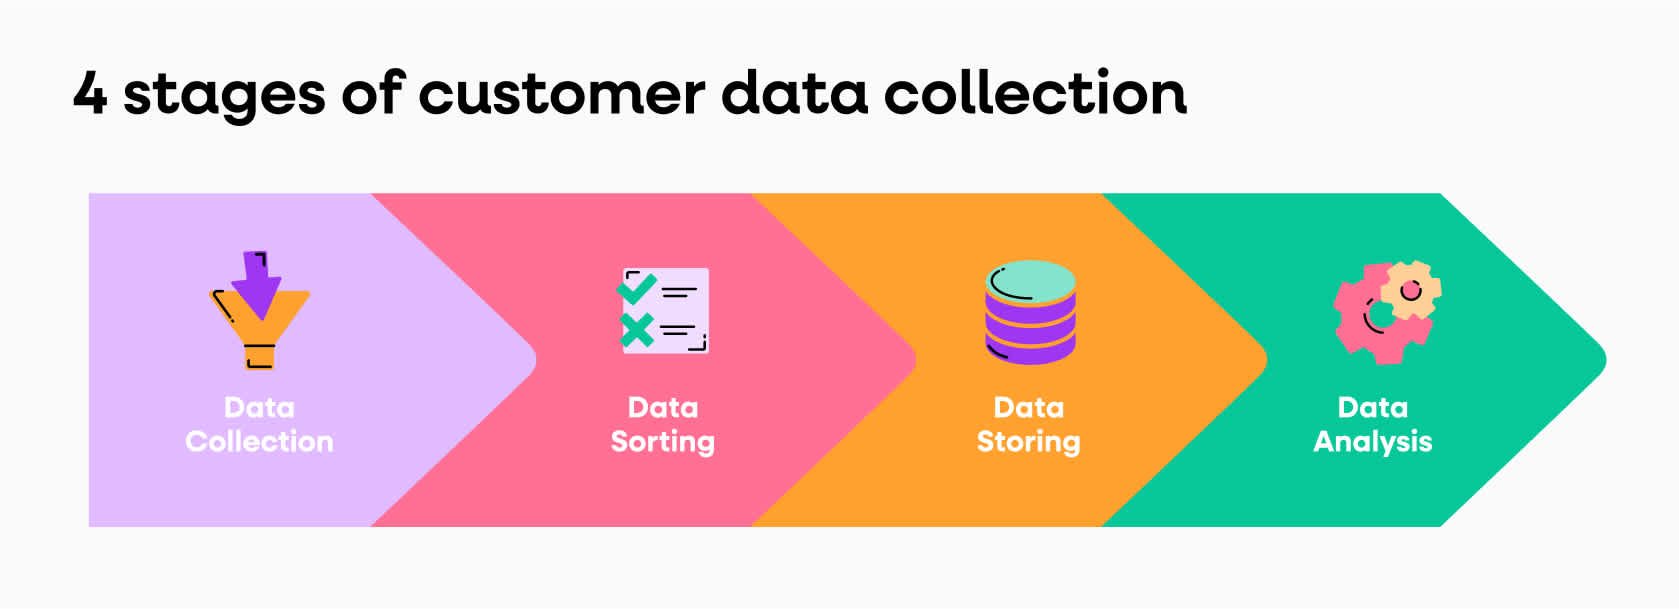 4 stages of customer data collection